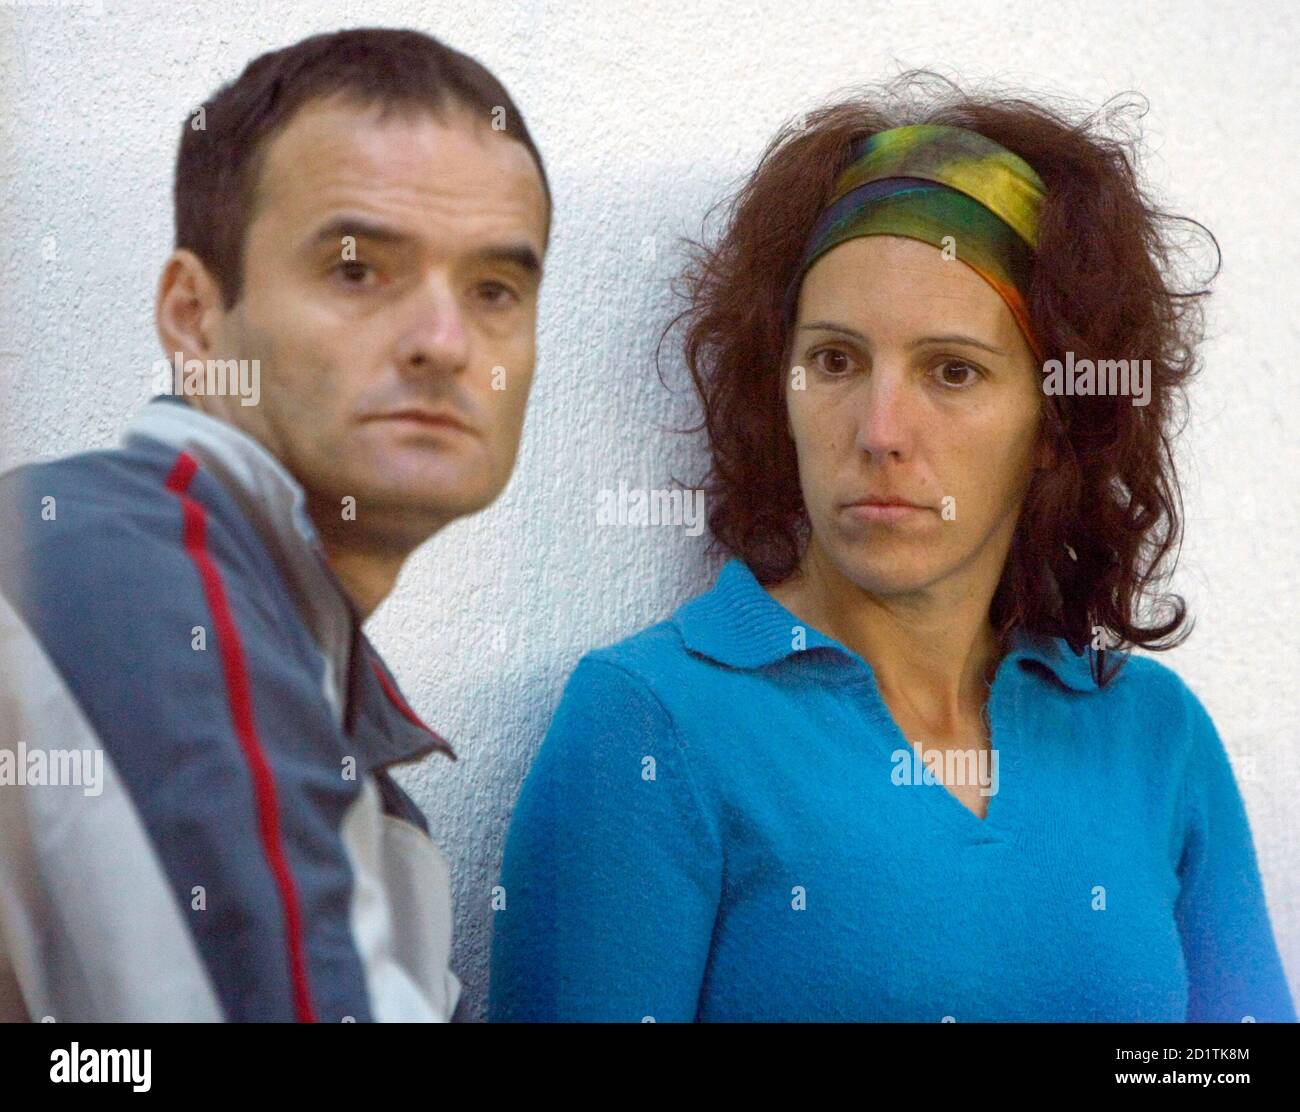 Alleged ETA leaders Juan Antonio Olarra Guridi (L) and Ainhoa Mugica Goni  attend their trial at Spain's High Court in Madrid September 28, 2007.  Olarra and Mugica are accused of participating in